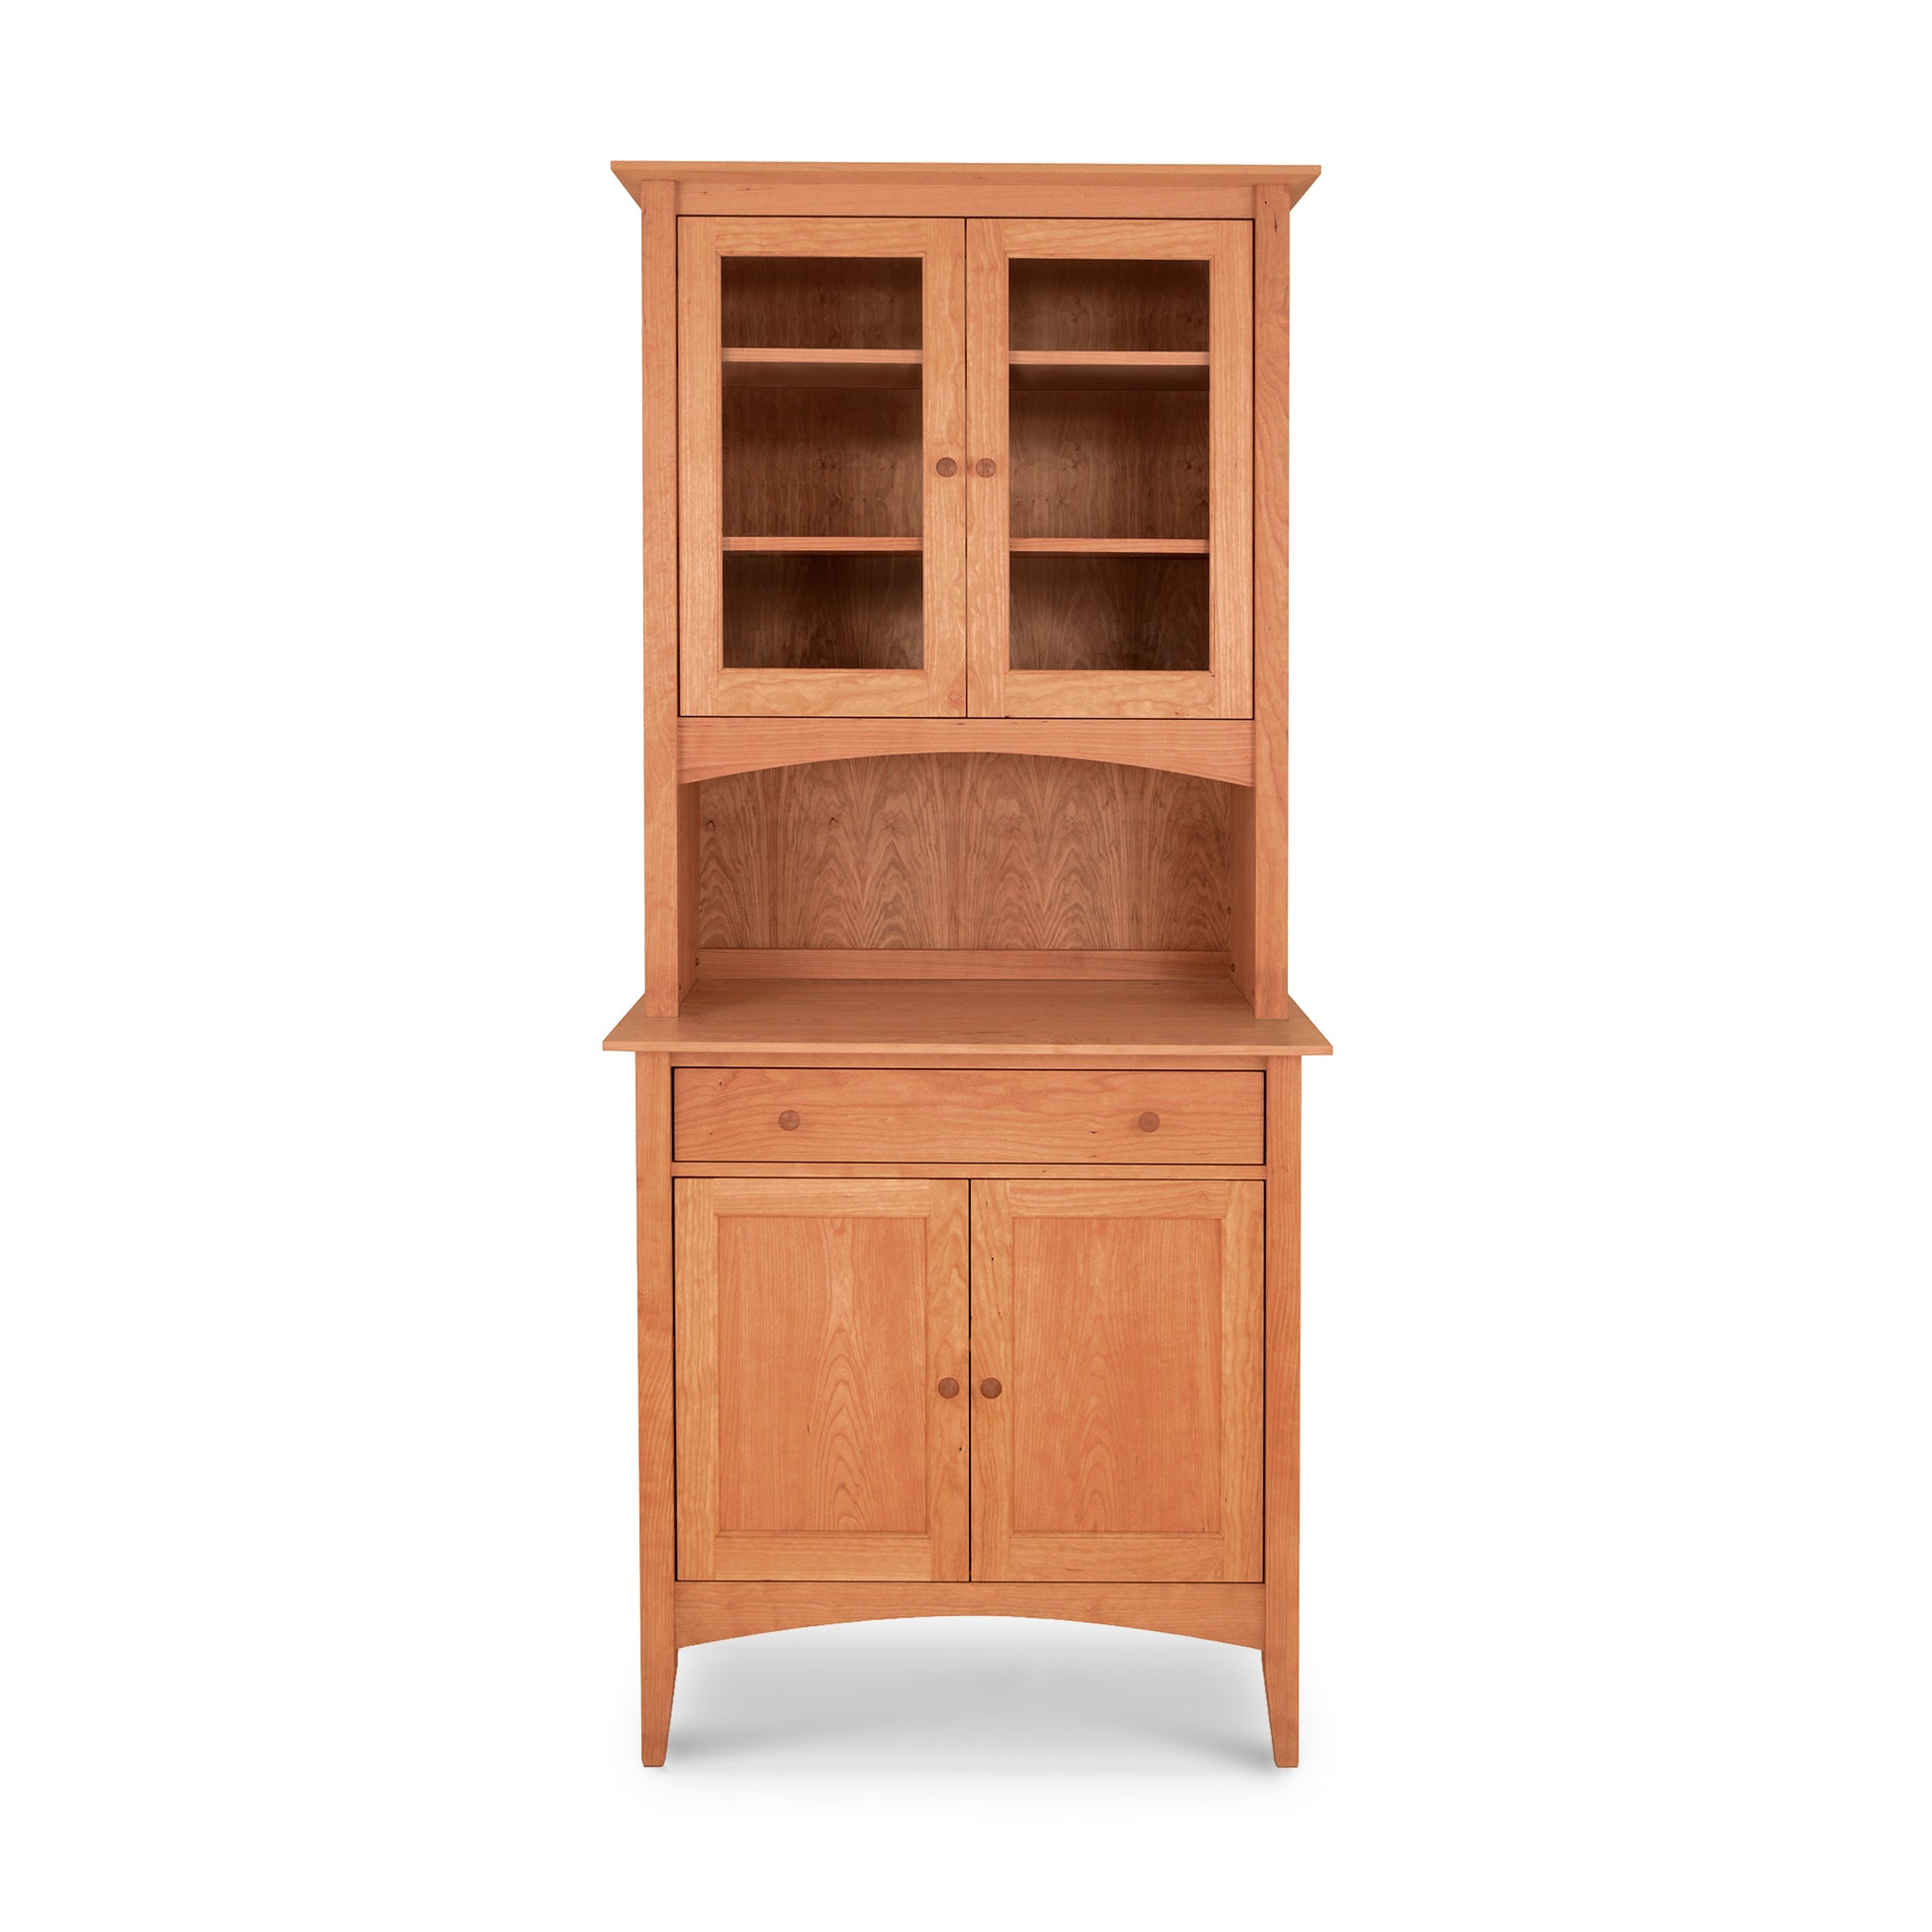 An American Shaker Small 38" China Cabinet by Maple Corner Woodworks, with a glass door, featuring hardwood construction for sturdy storage.